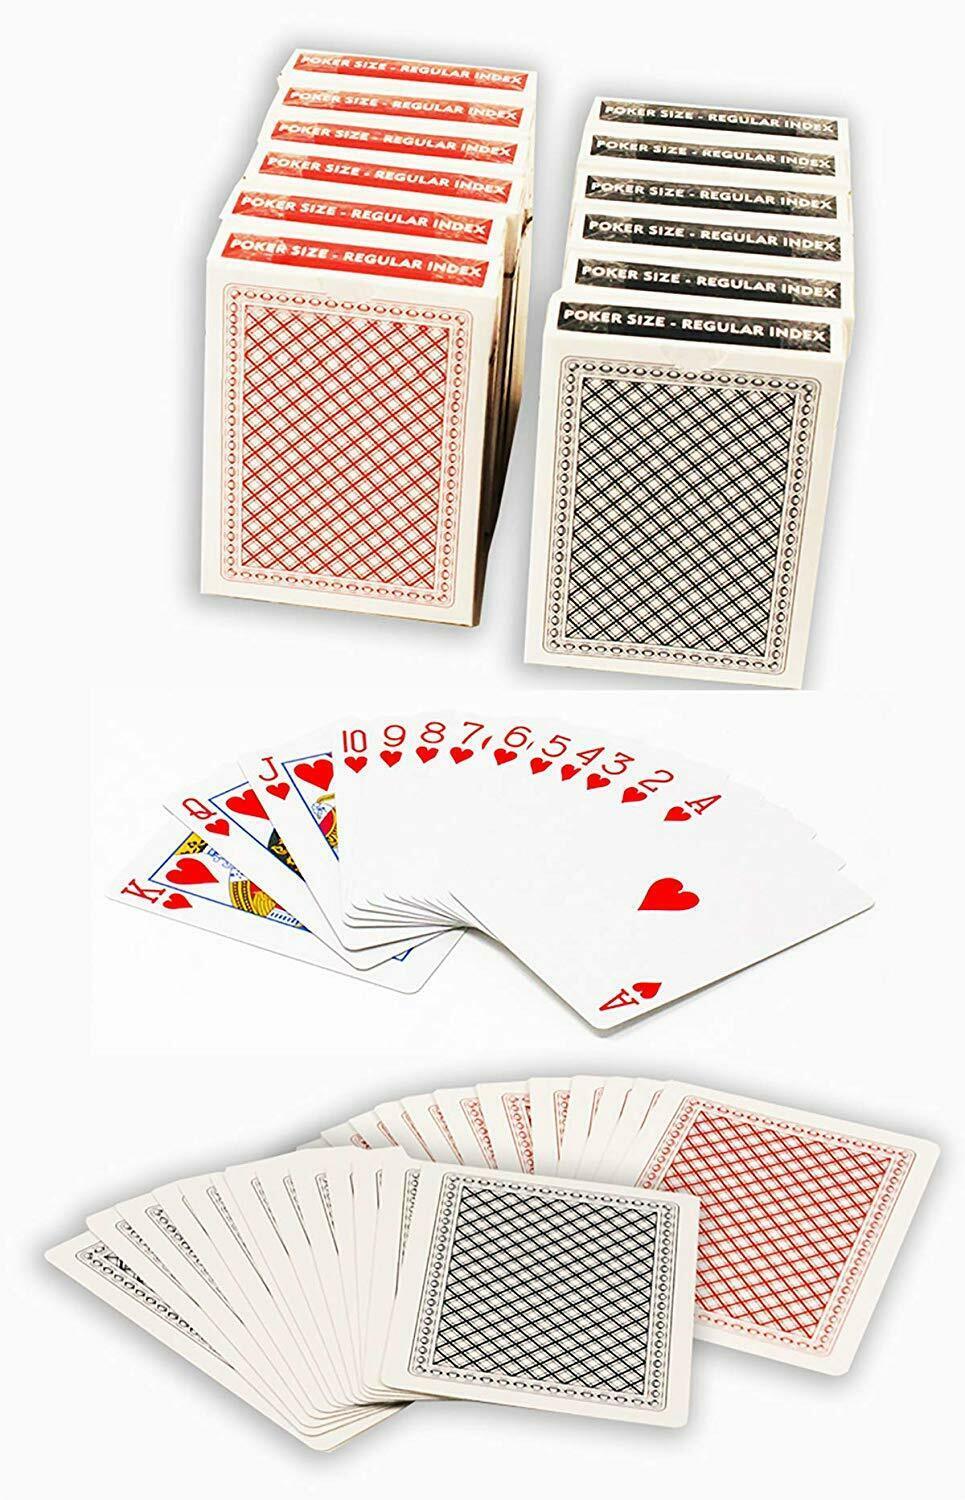 Primary image for Value Pack 12 Decks Paper Playing Cards with Plastic Coating Poker Size Regular